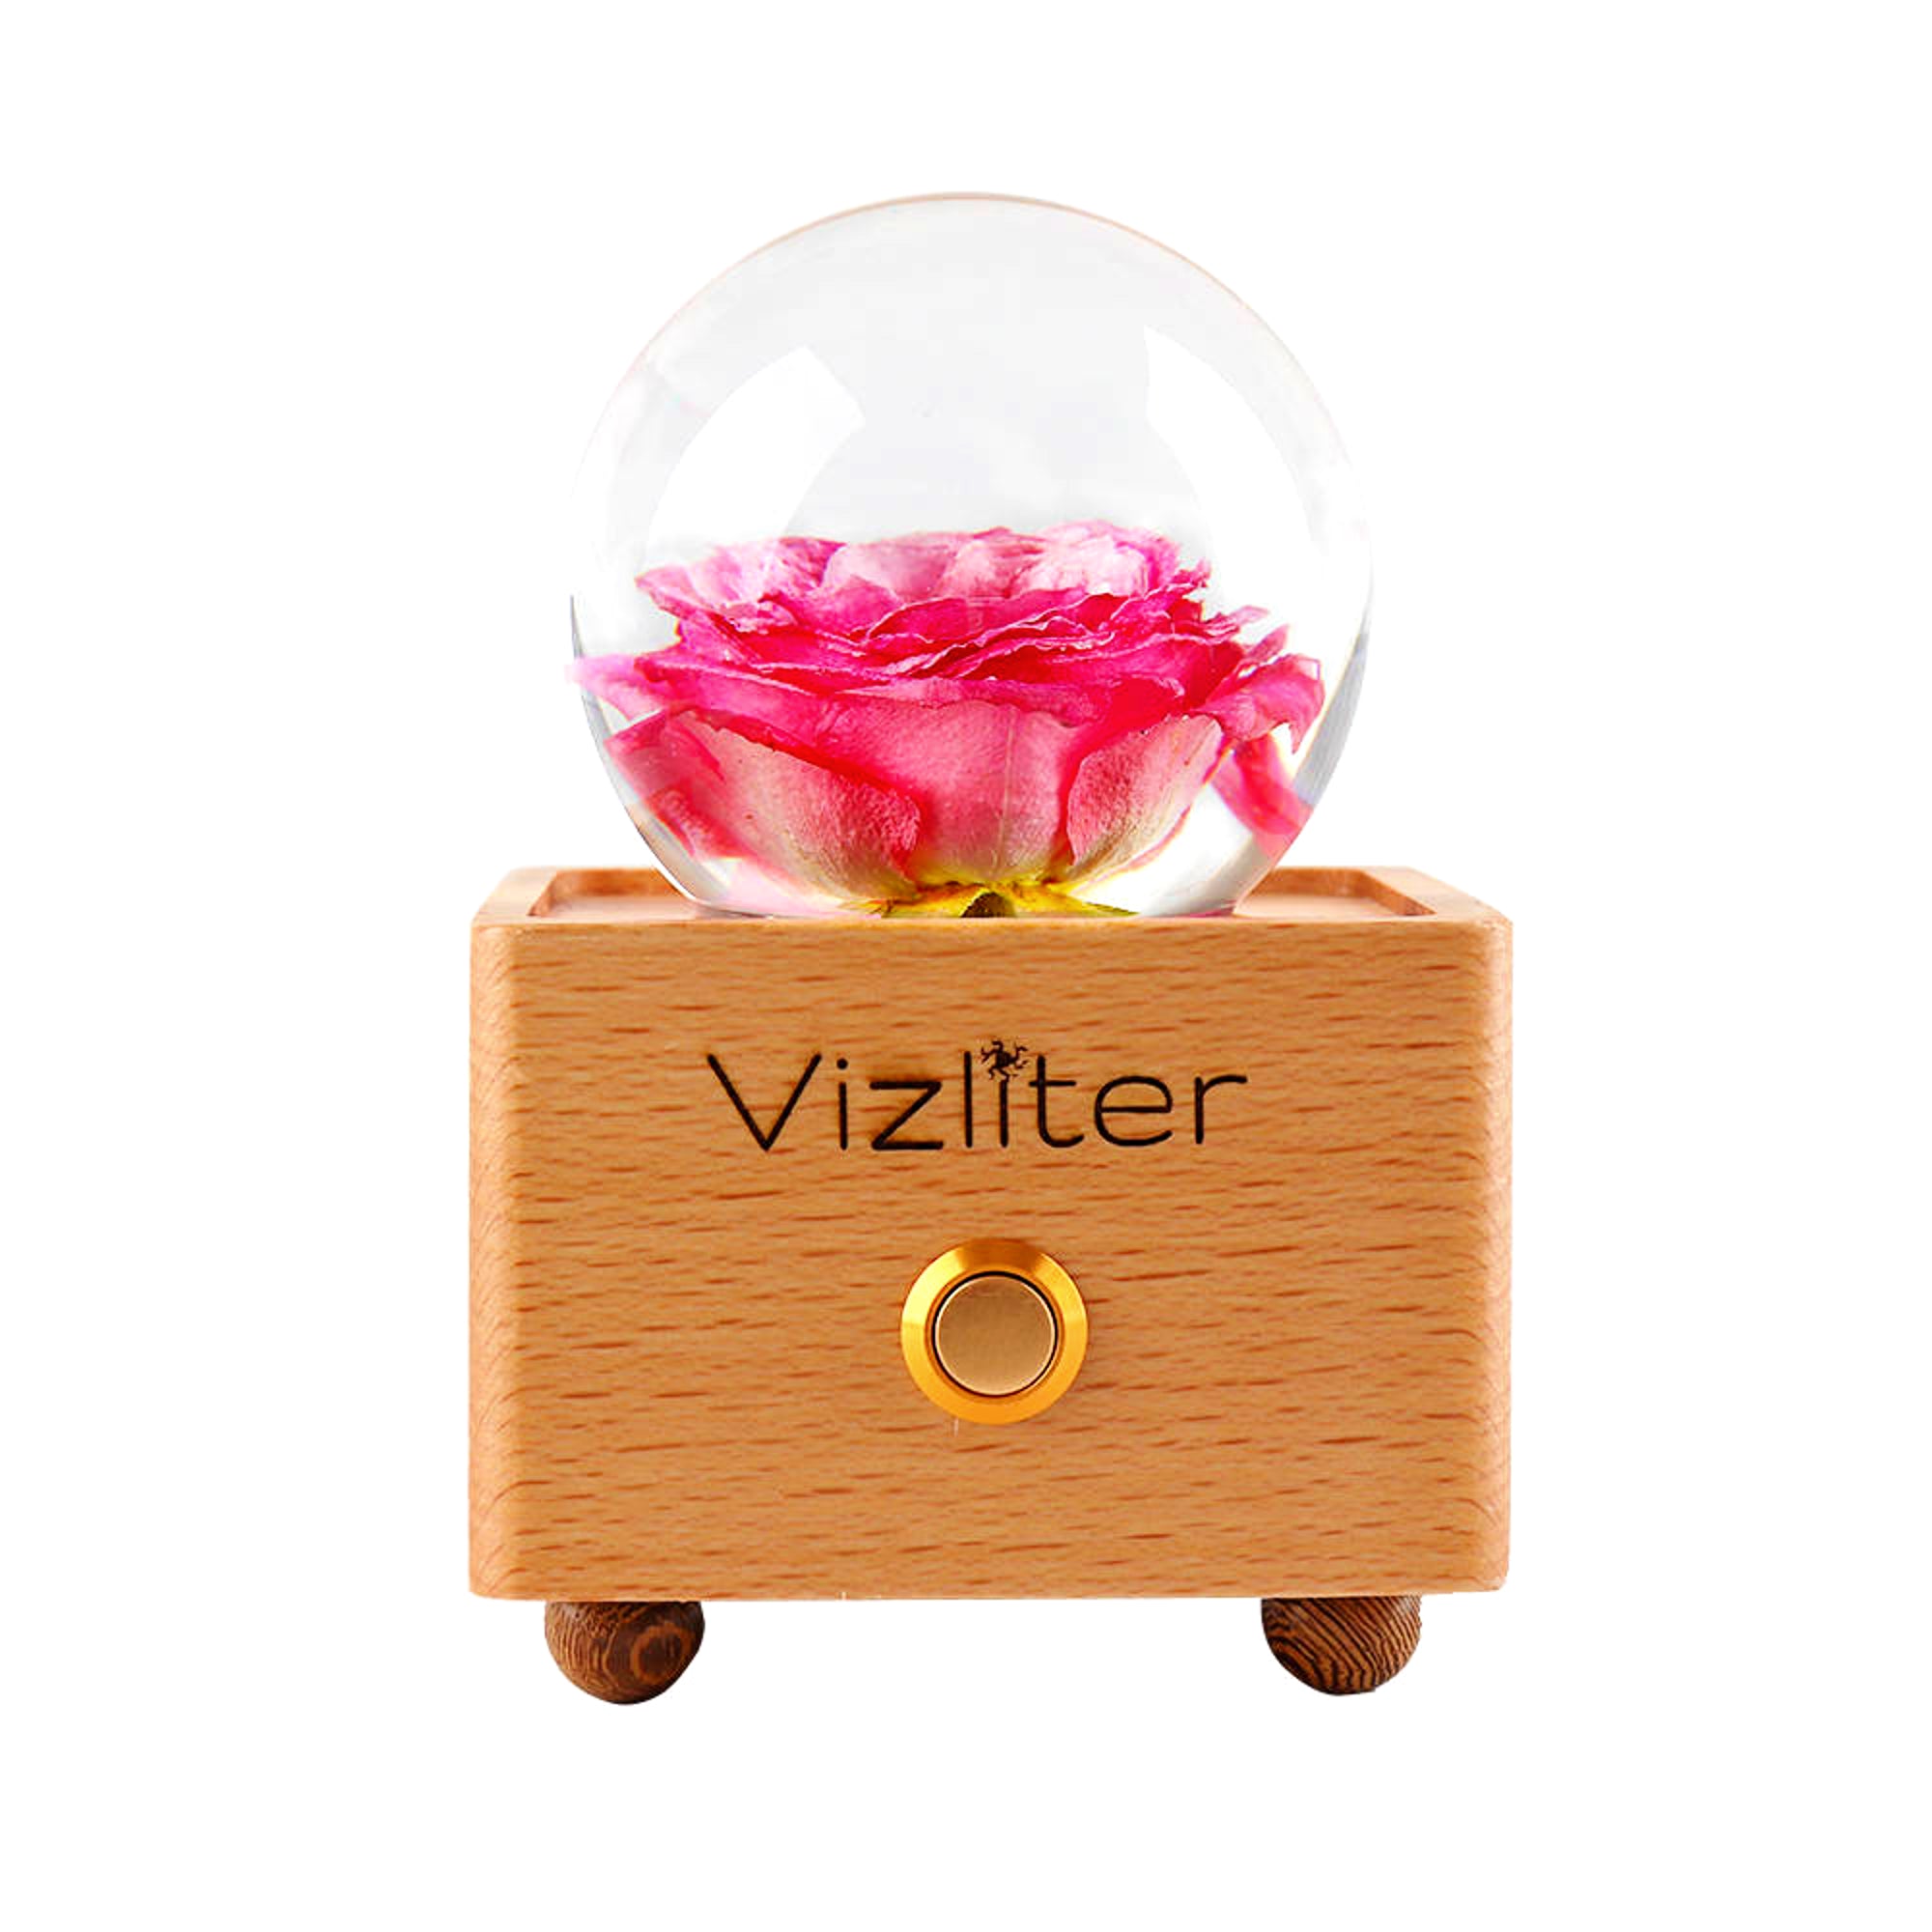 Bluetooth Speakers Crystal Ball LED Light Preserved Fresh Flower with Wood Base Night Light Pink Rose